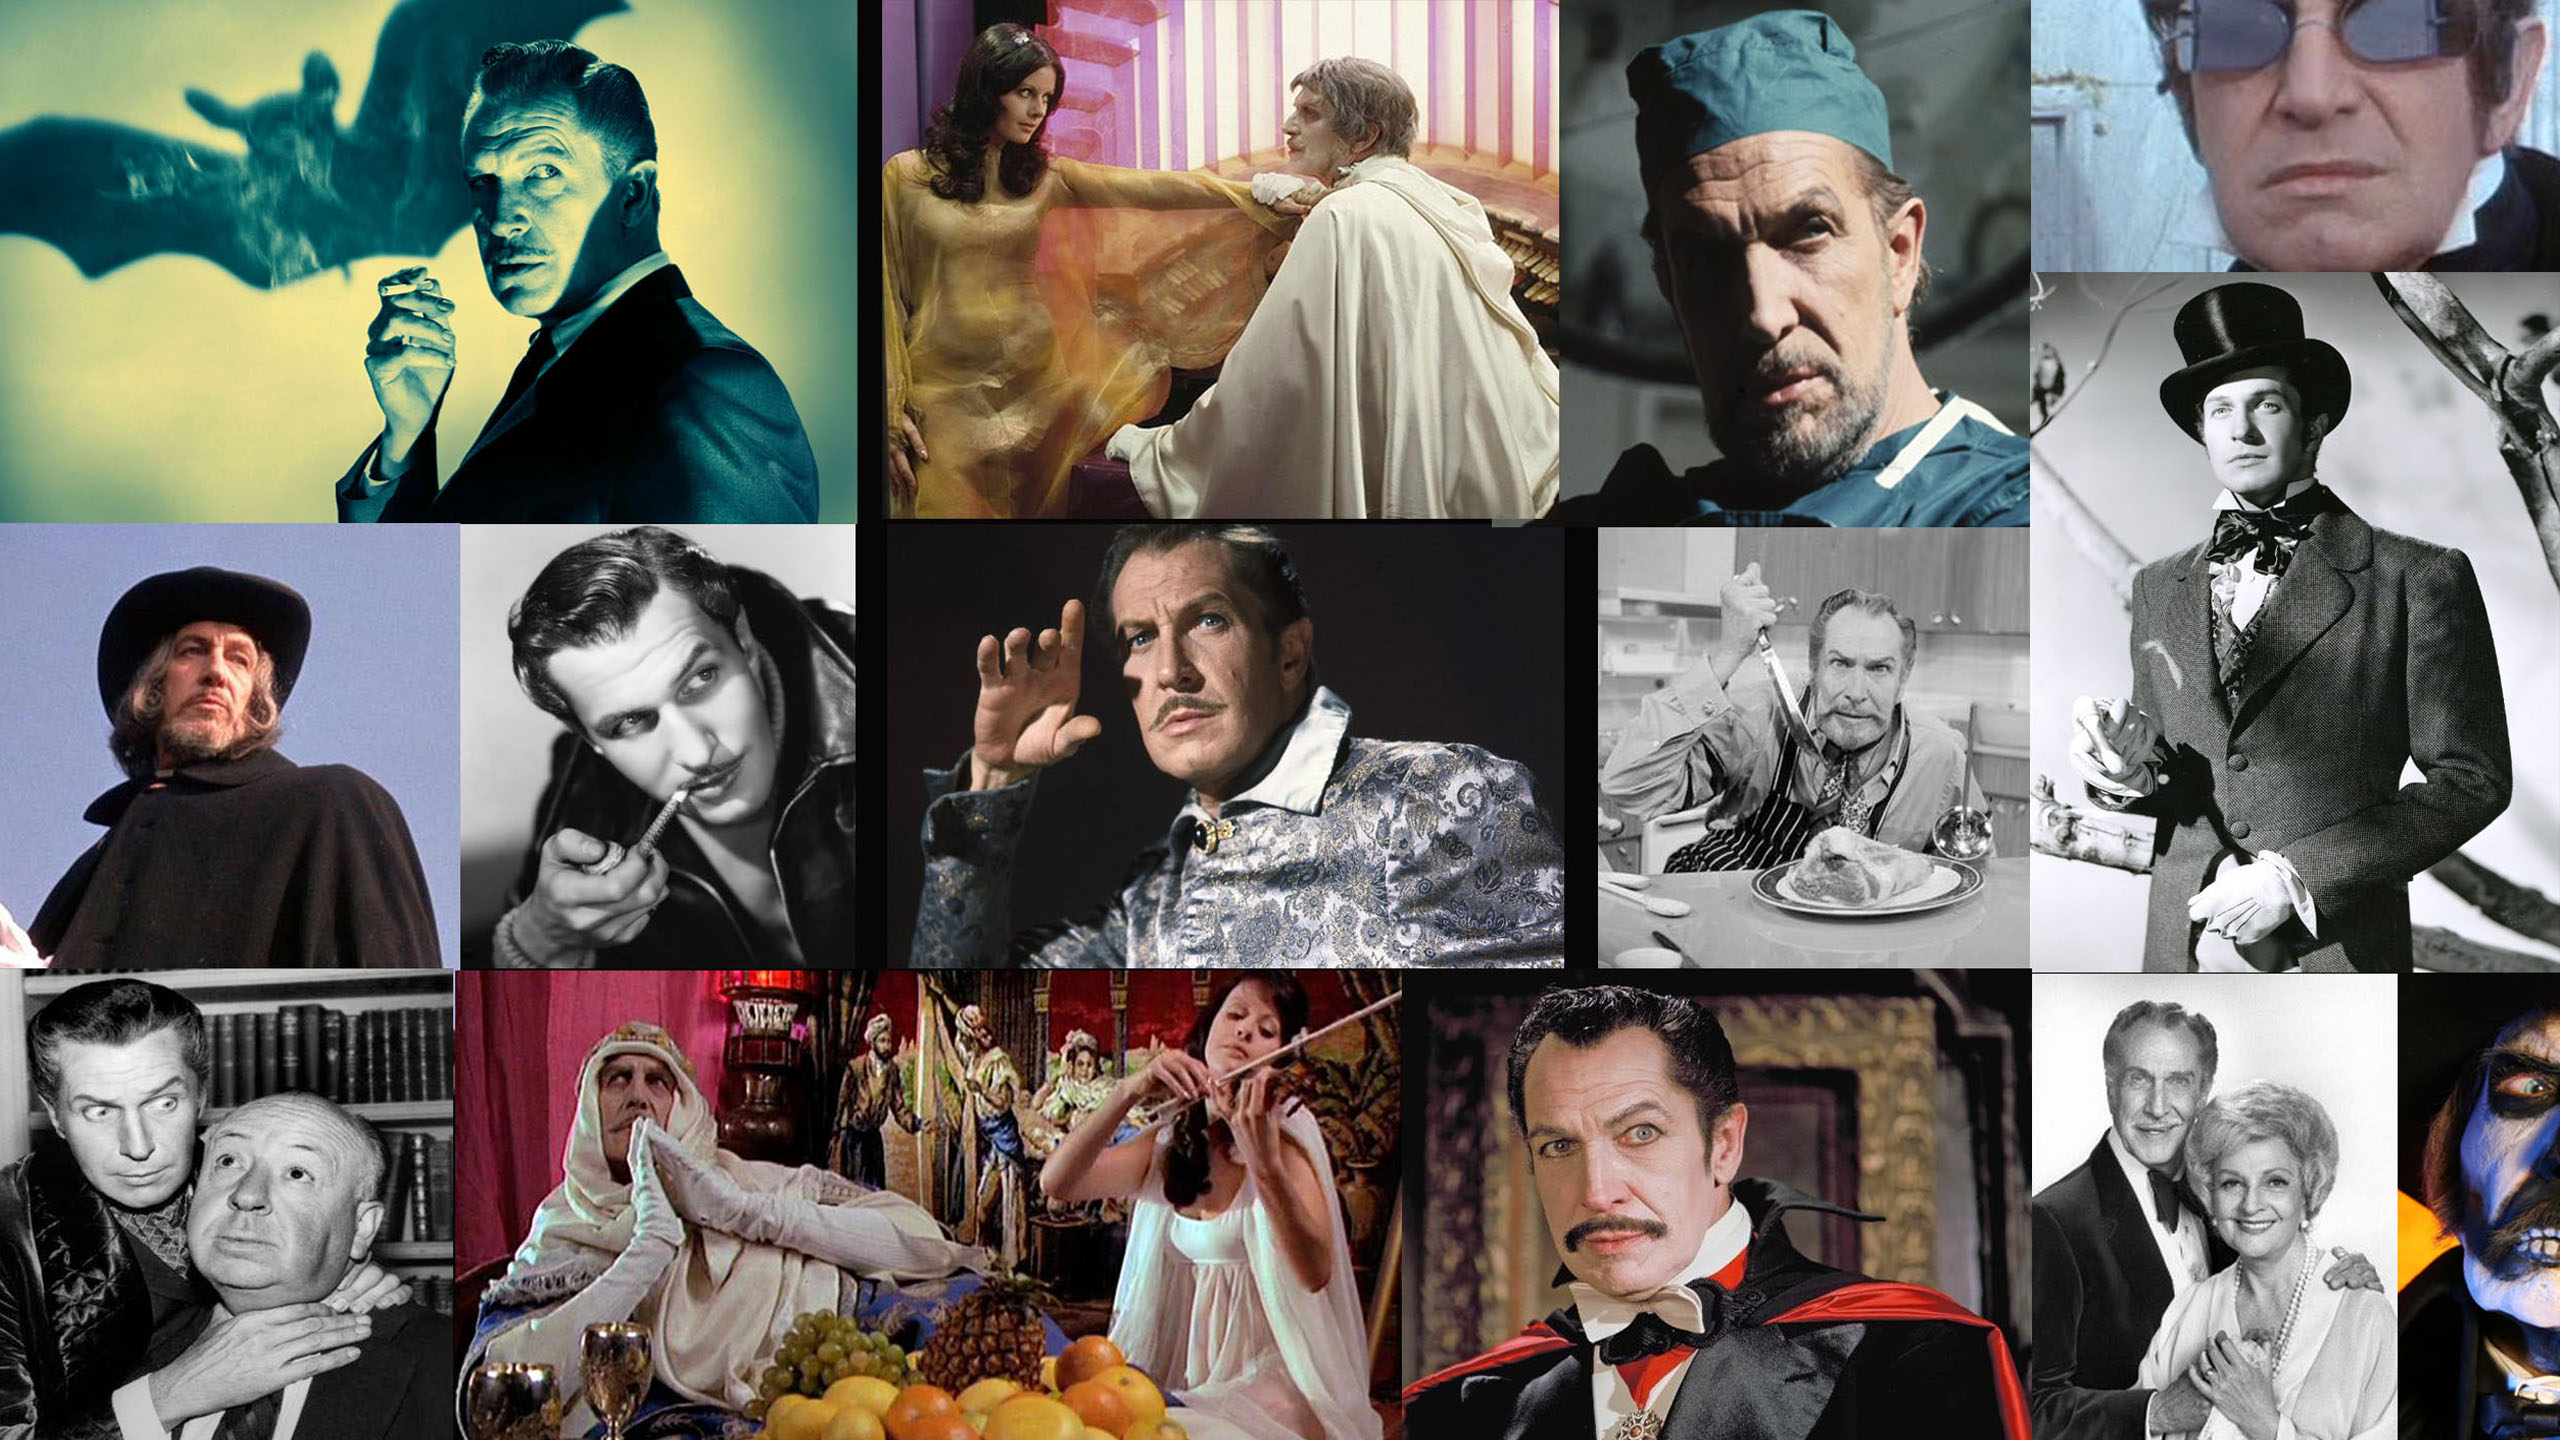 About Vincent Price My First Trip Abroad July